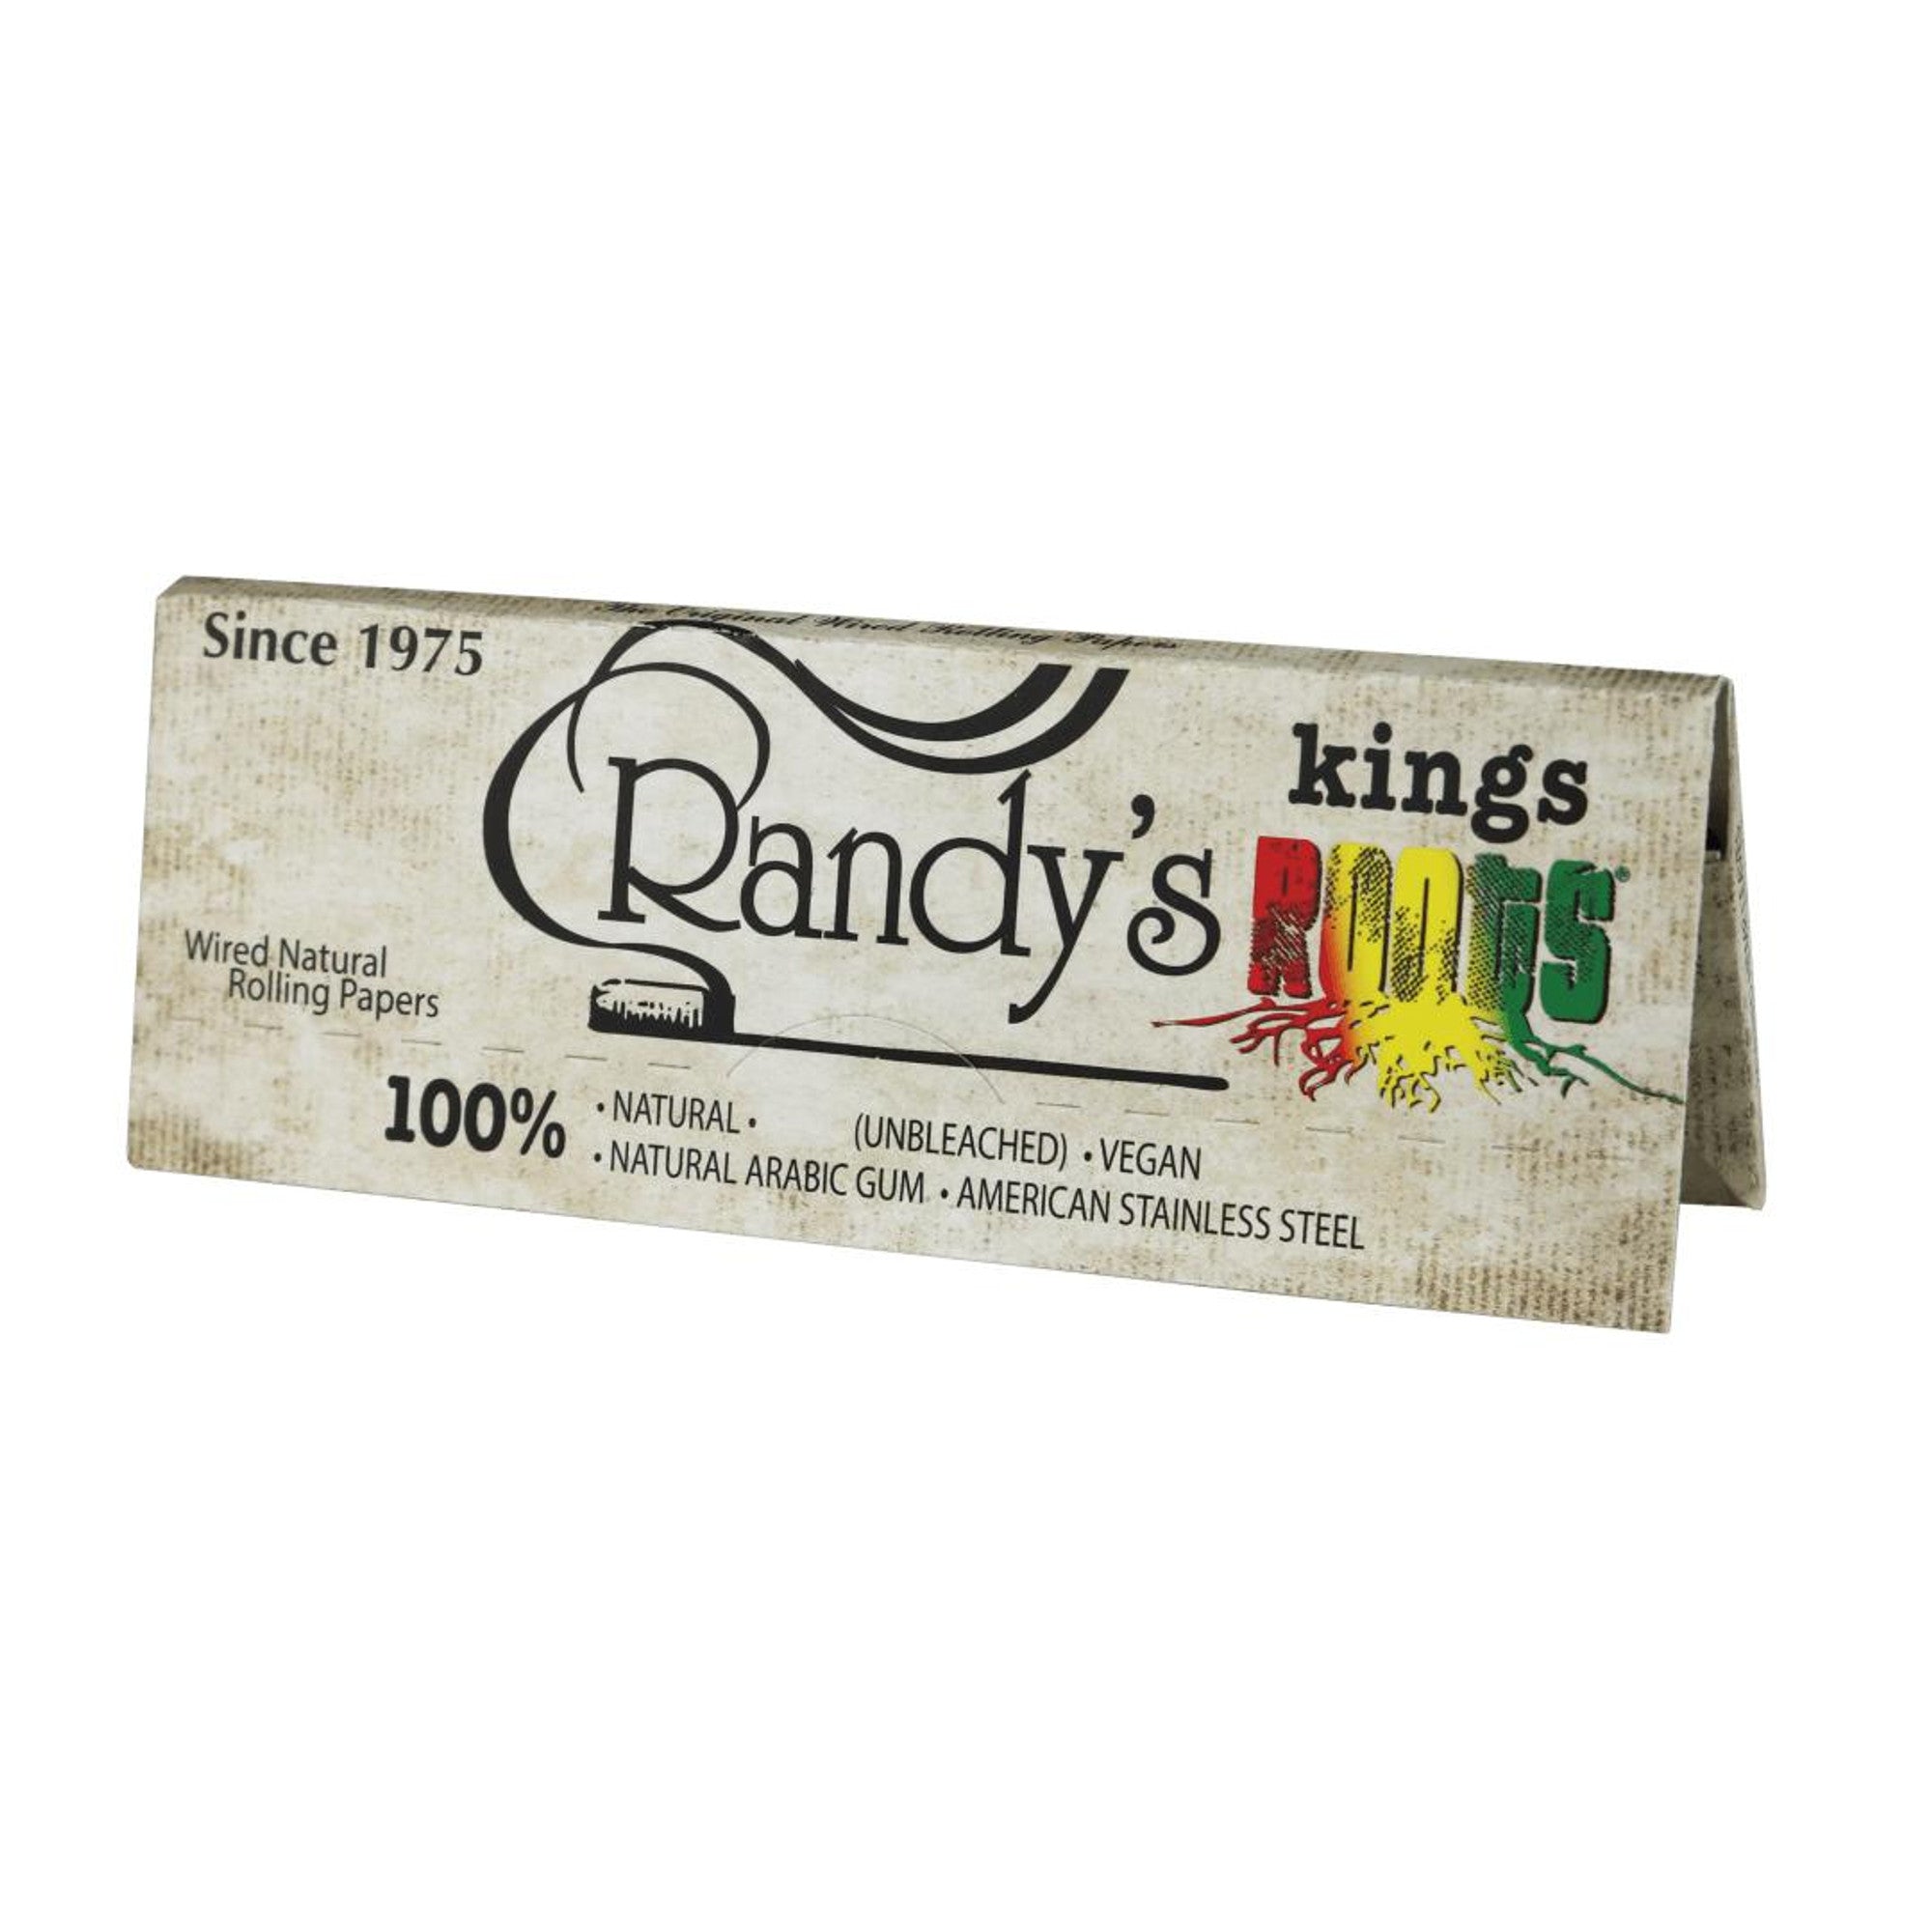 Randys King Roots paper